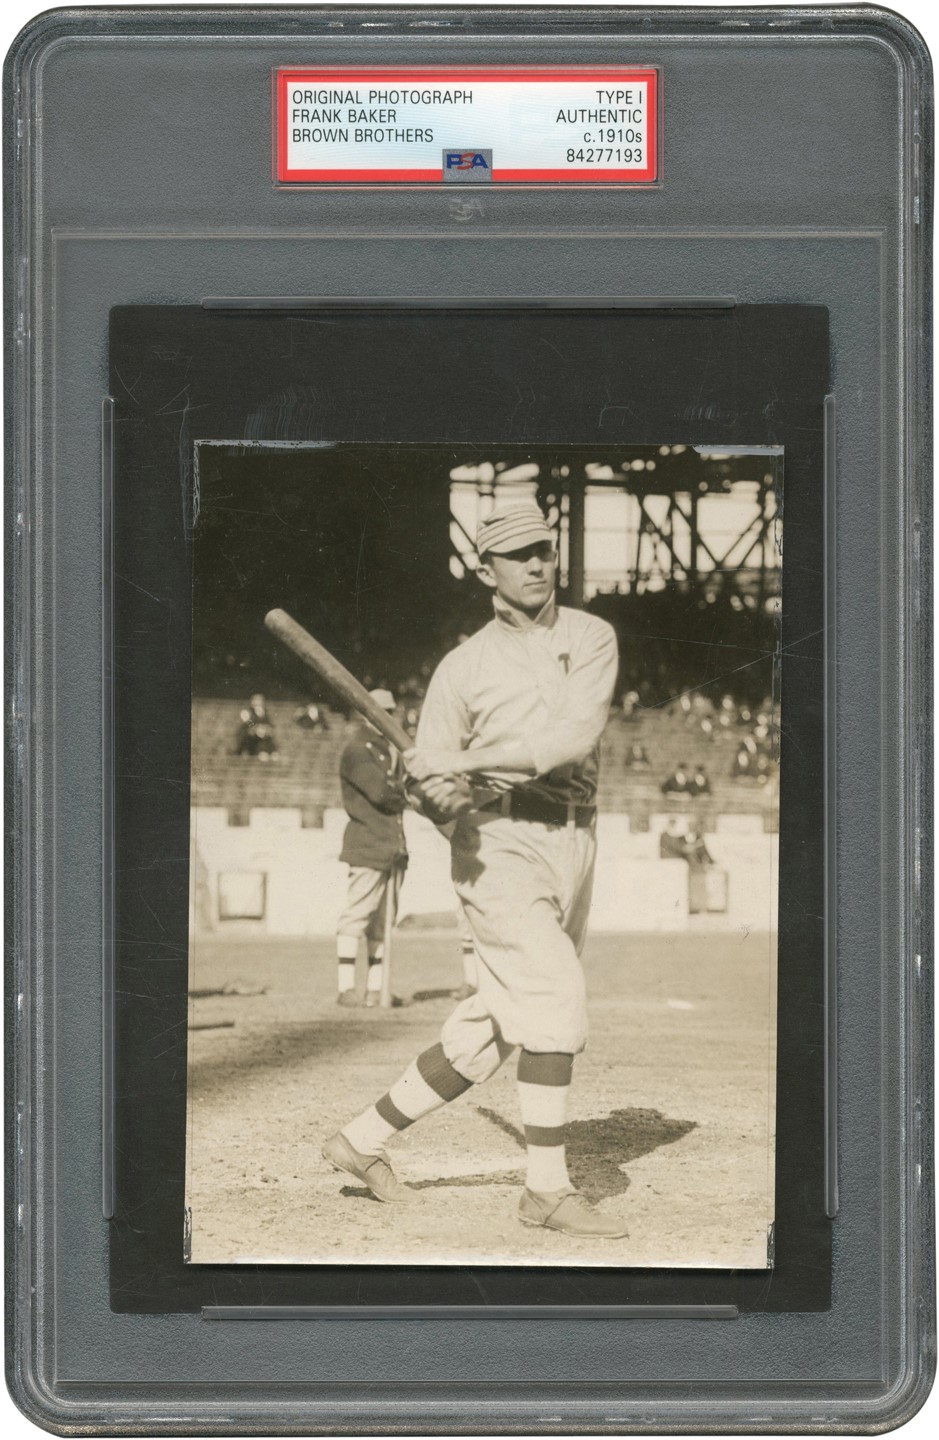 The Brown Brothers Collection - Home Run Baker Batting Photograph (PSA Type I)